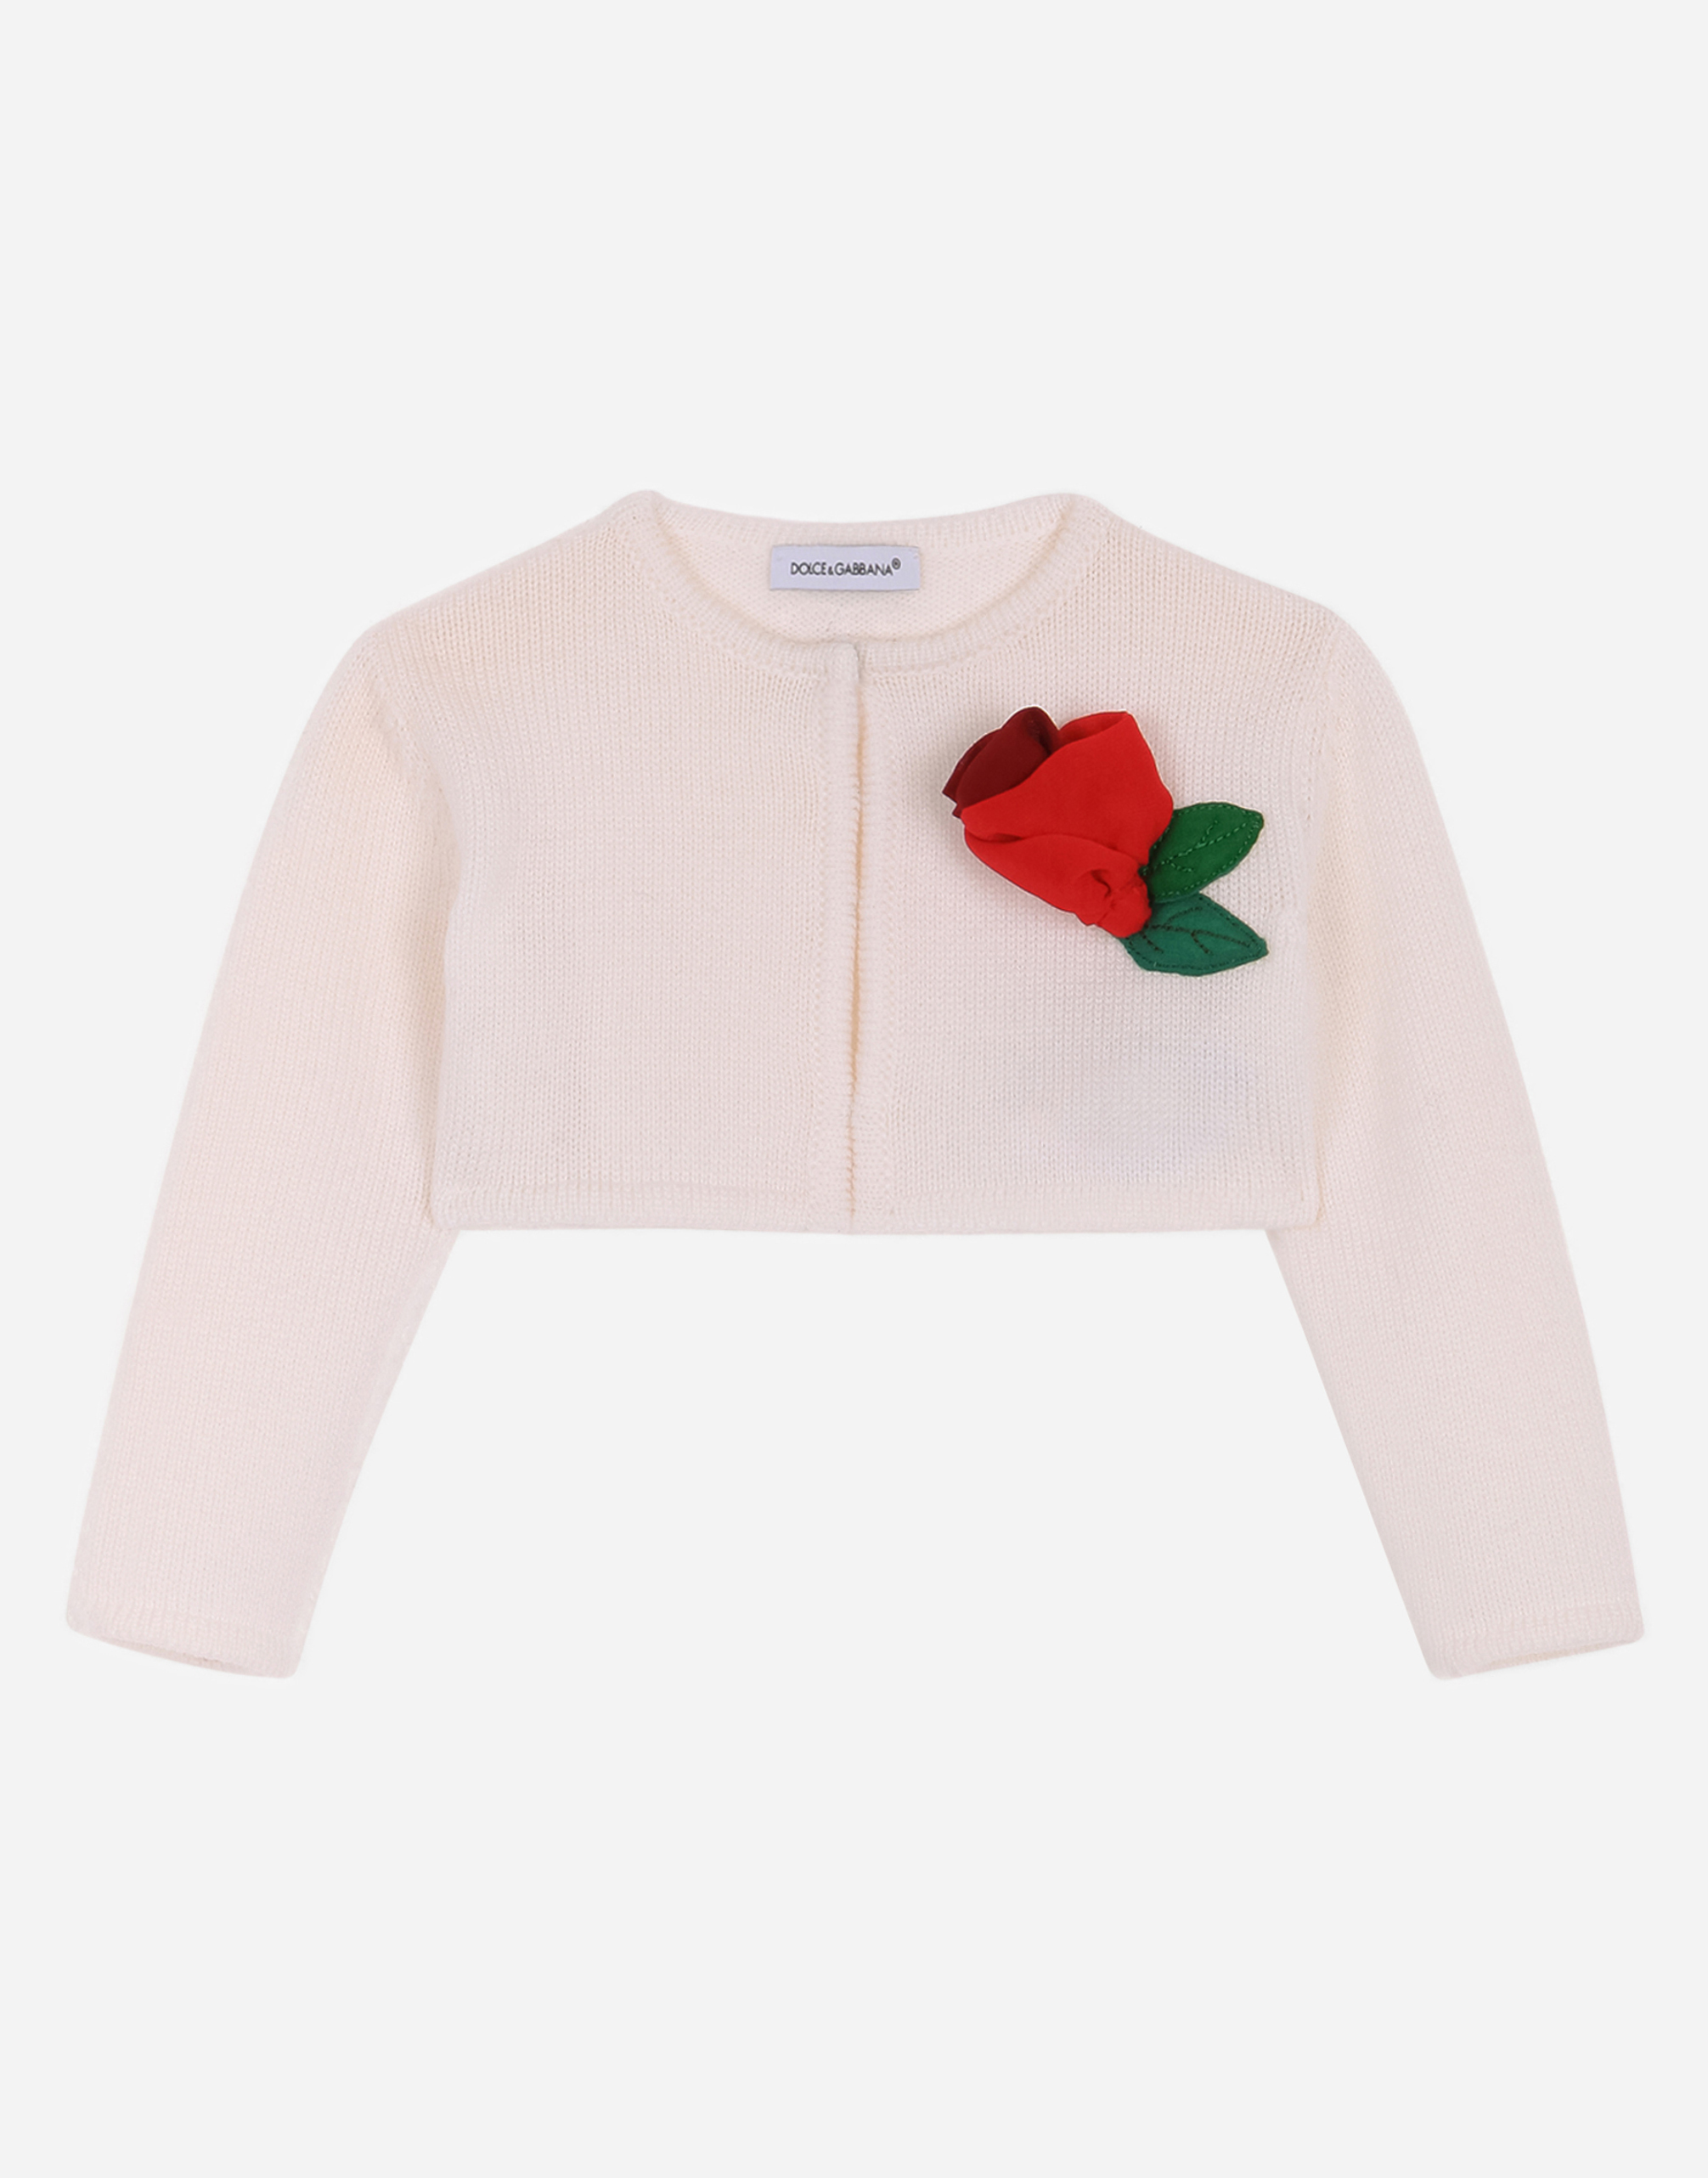 Dolce & Gabbana Babies' Short Knit Cardigan With Rose Patch